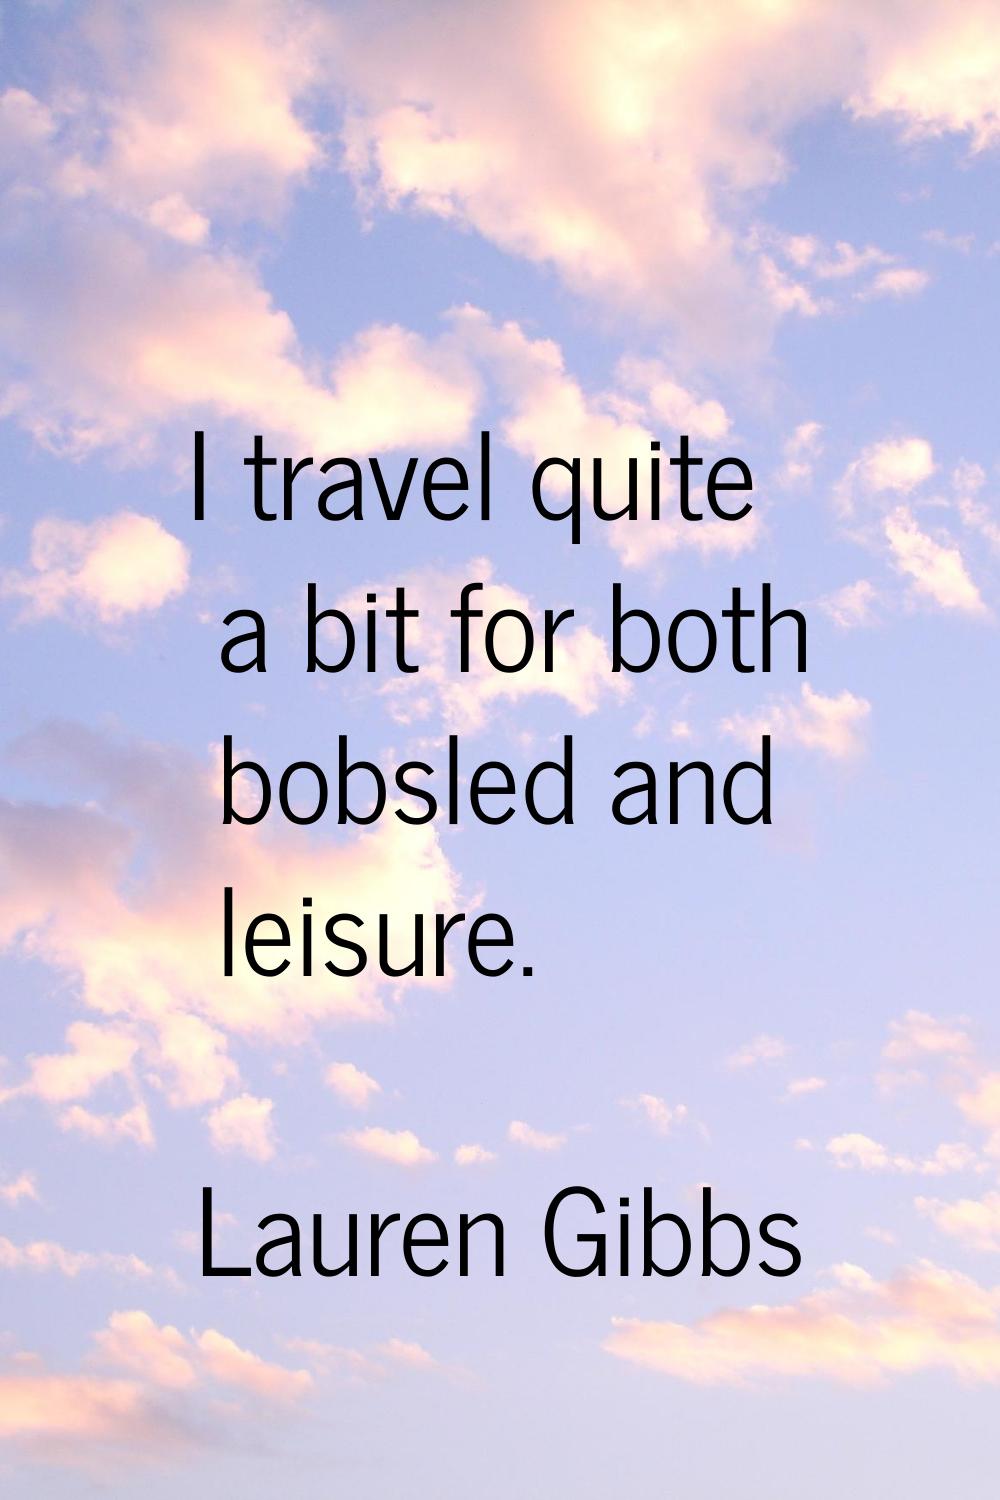 I travel quite a bit for both bobsled and leisure.